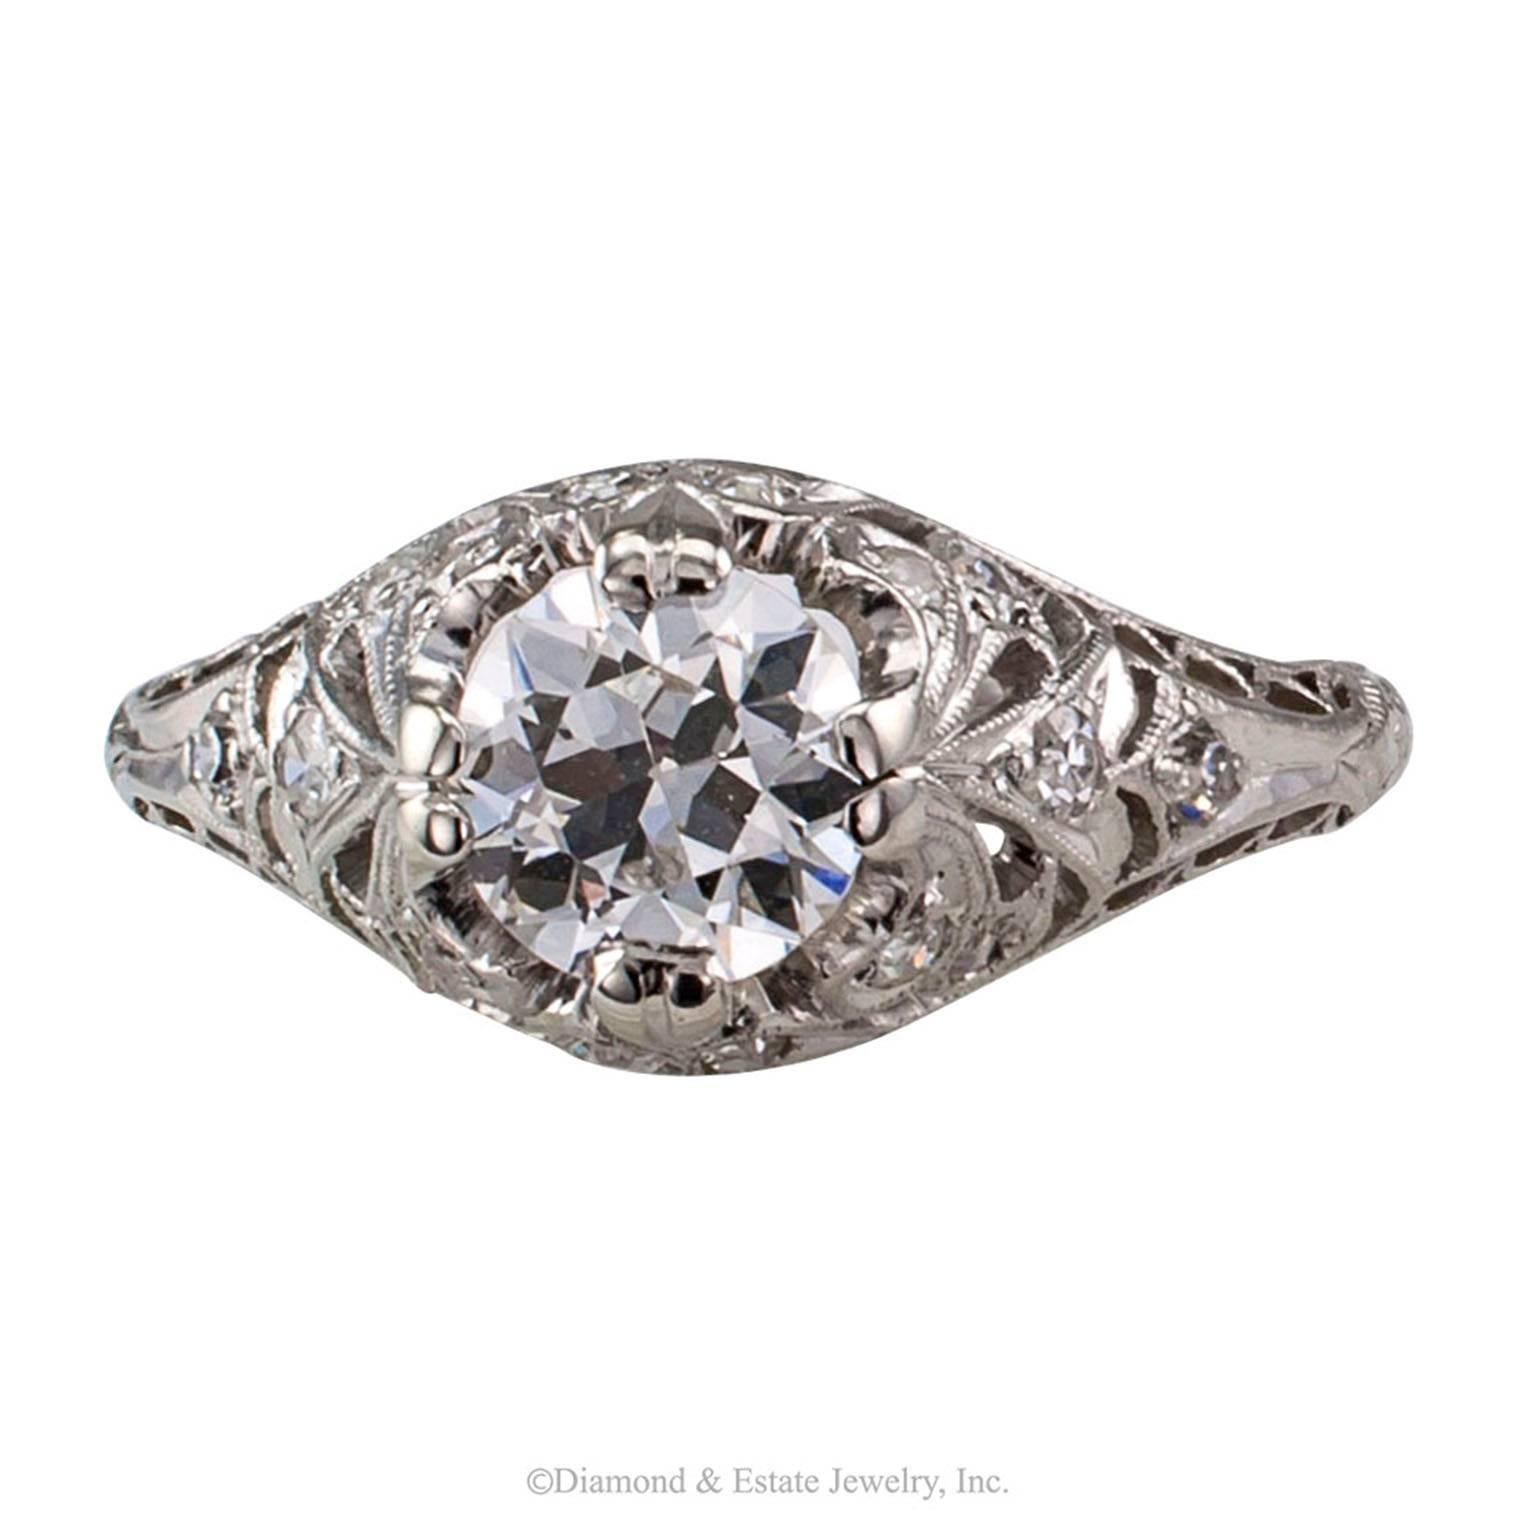 Edwardian 0.85 Carat Diamond Platinum Engagement Ring

Edwardian 0.85 carat diamond engagement ring mounted in platinum circa 1910.  The design is crowned by an old European-cut diamond weighing approximately 0.85 carat, approximately G color and